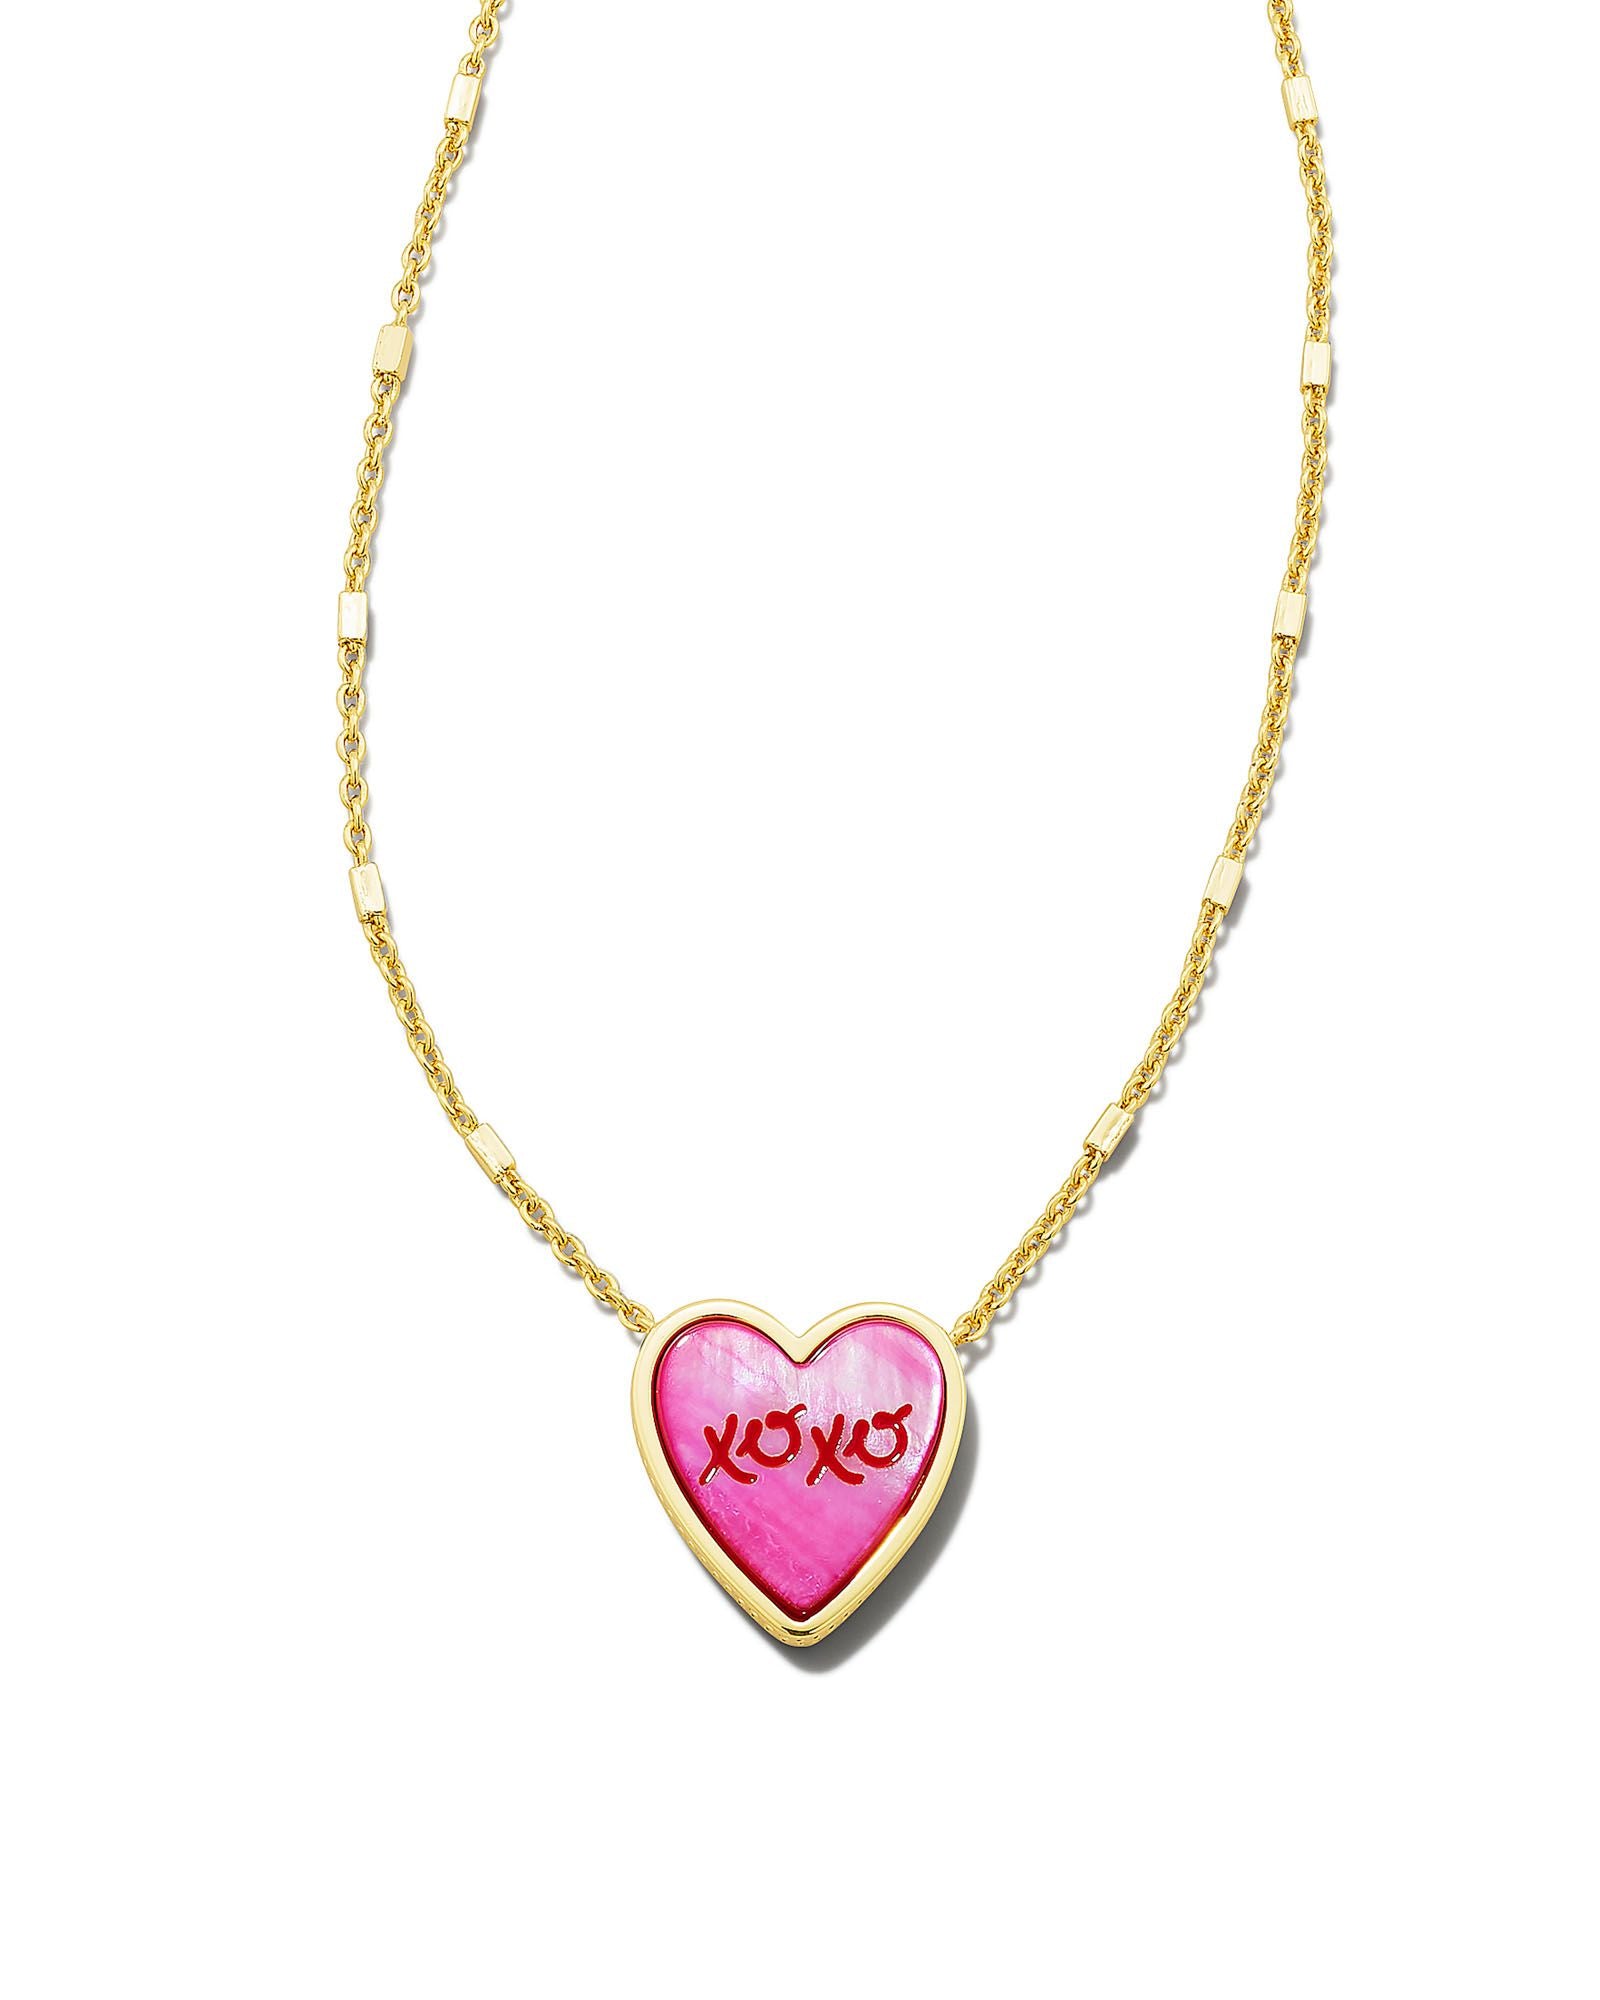 Kendra Scott | XOXO Heart Gold Pendant Necklace in Hot Pink Mother-of-Pearl - Giddy Up Glamour Boutique